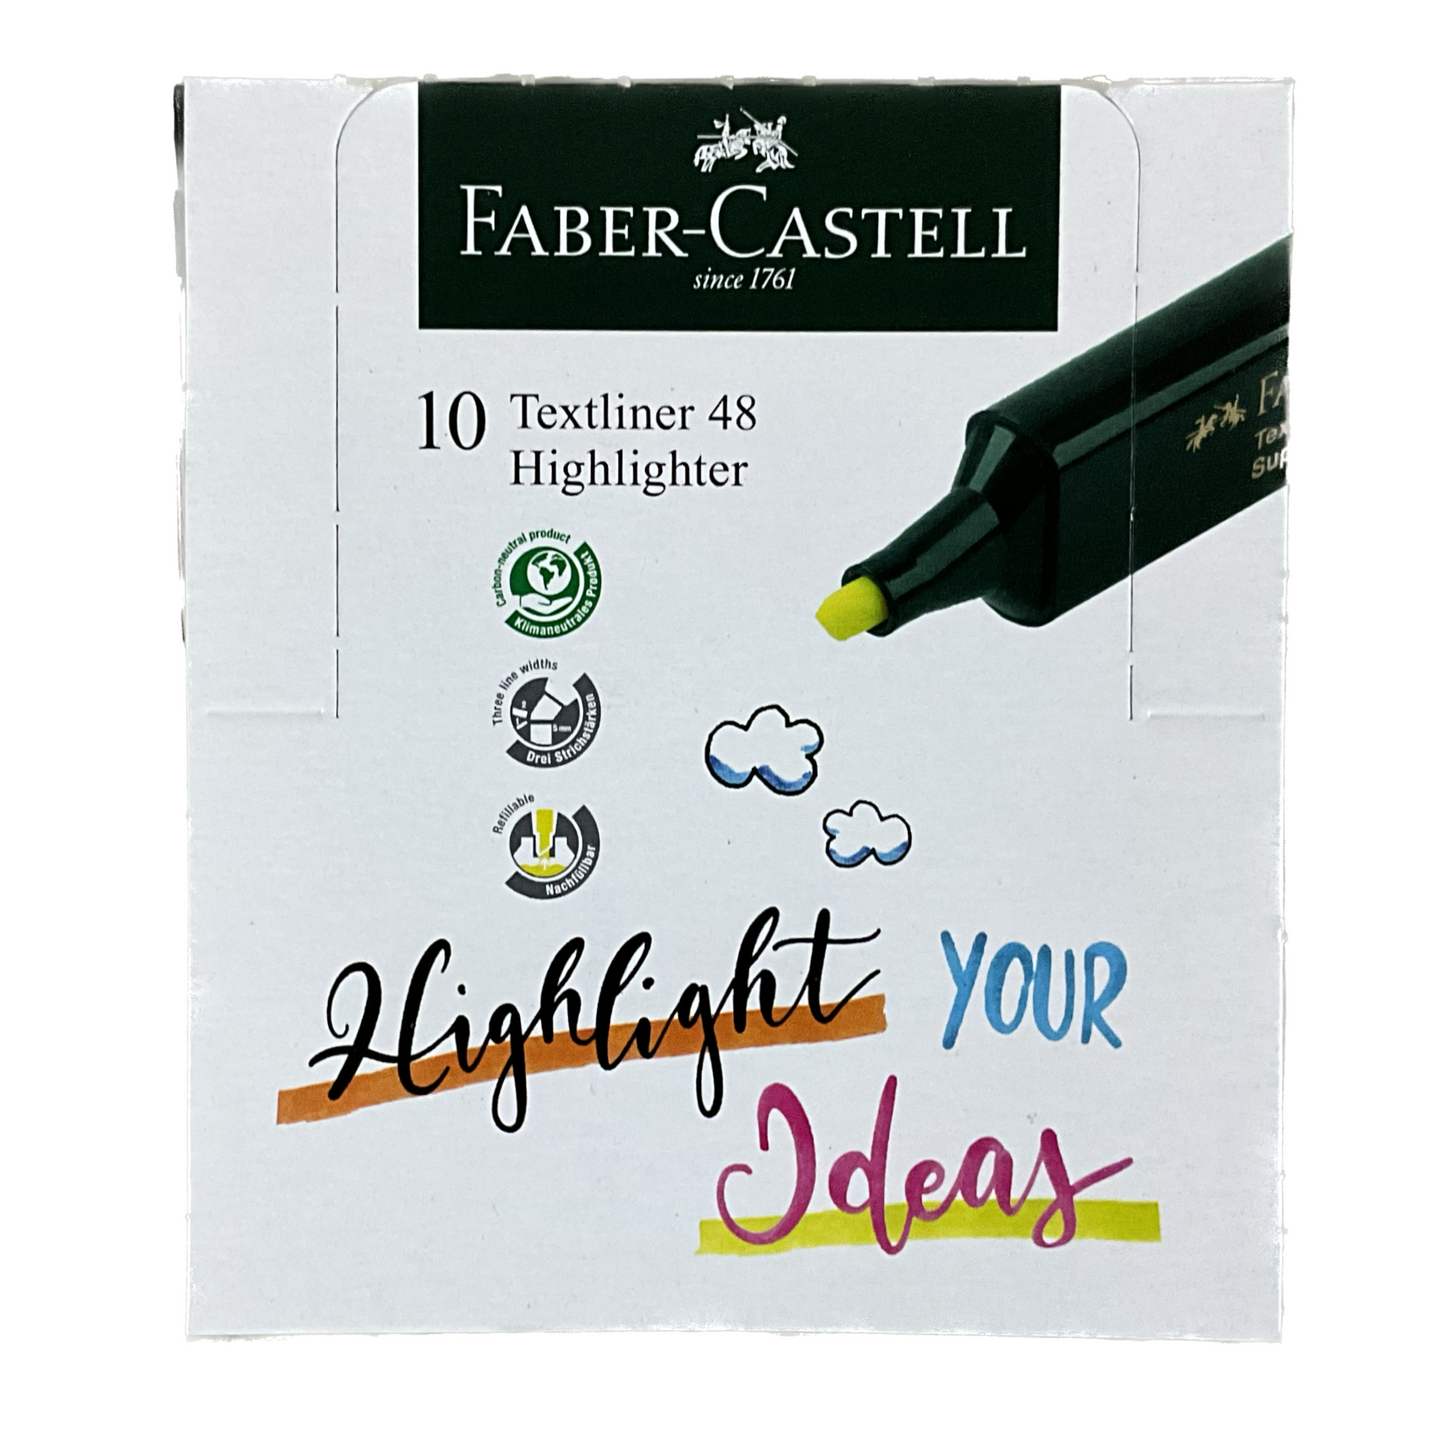 Faber-Castell Highlighter (Orange, Pink, Green, Yellow, or Blue)